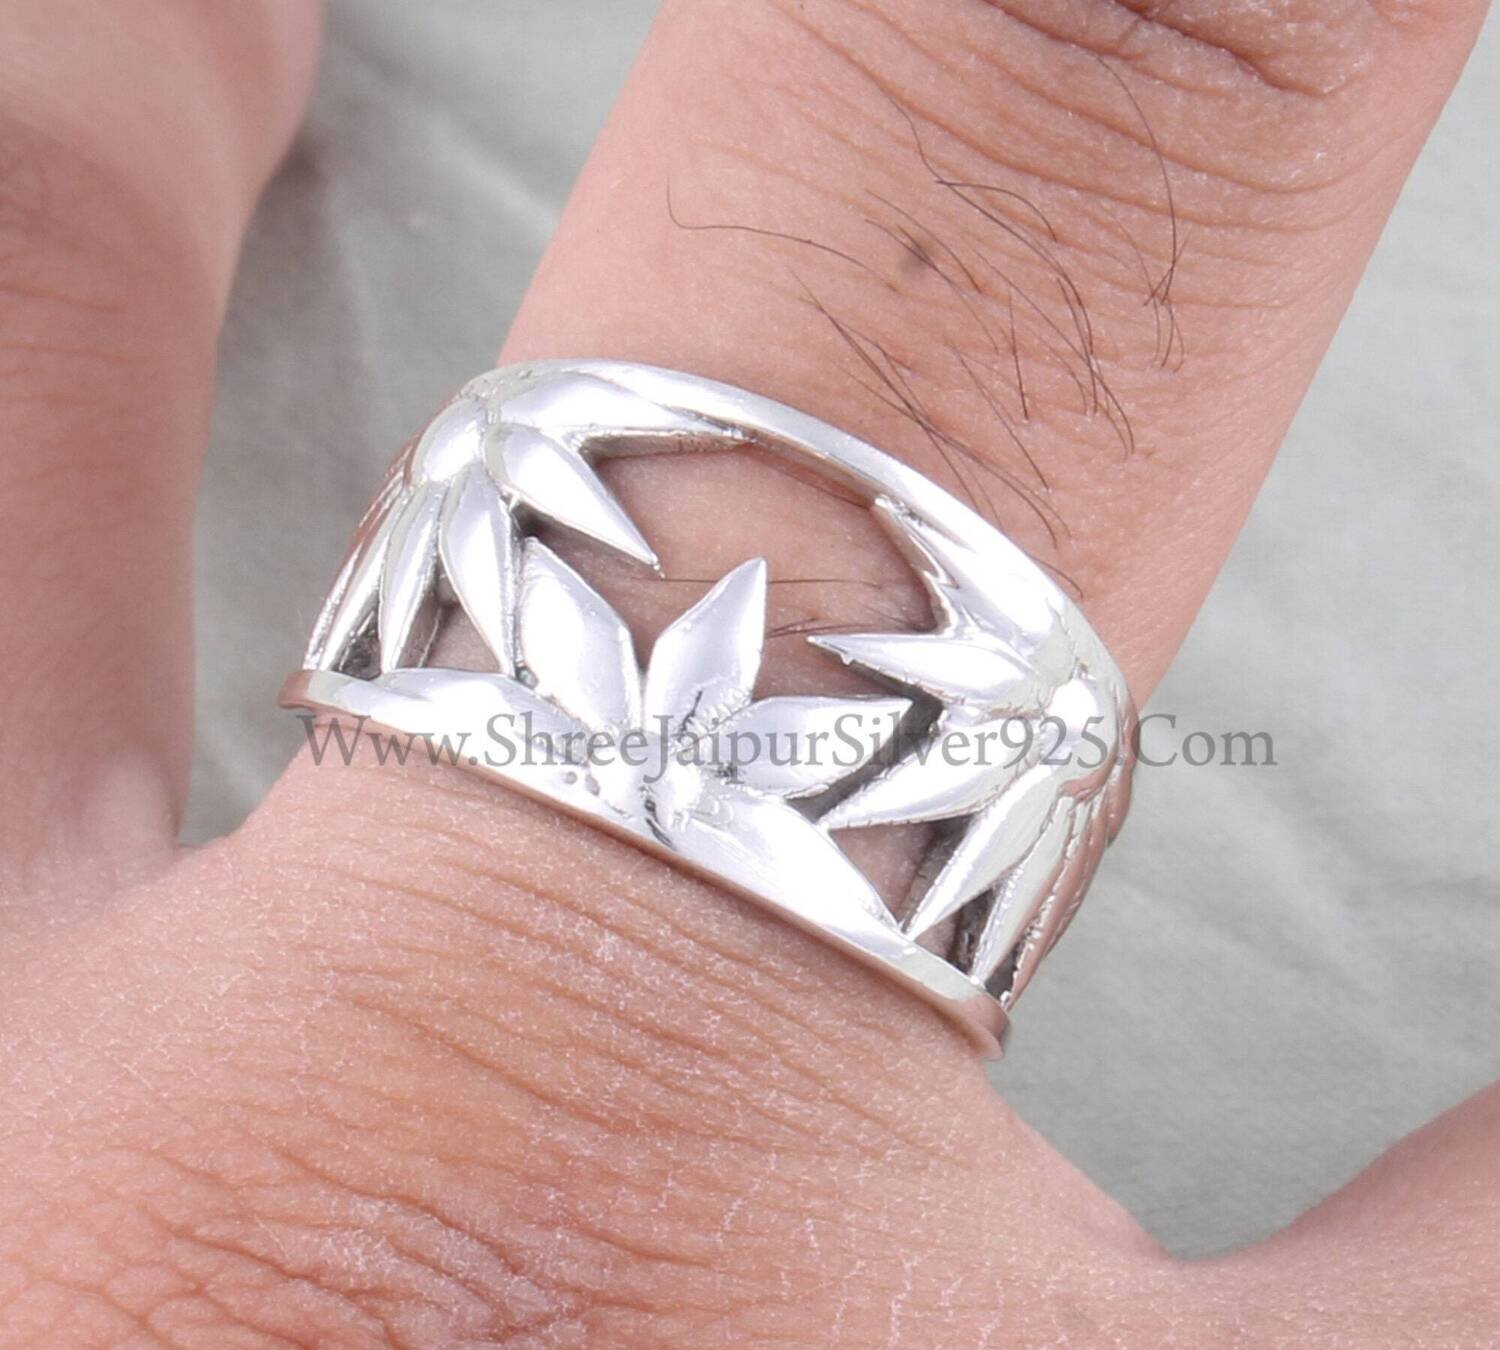 Flower Design Handmade Silver Band Ring, Solid 925 Sterling Silver Band Ring For Women, Party Wear Fashion Band Ring , Boho Thumb Ring Gift